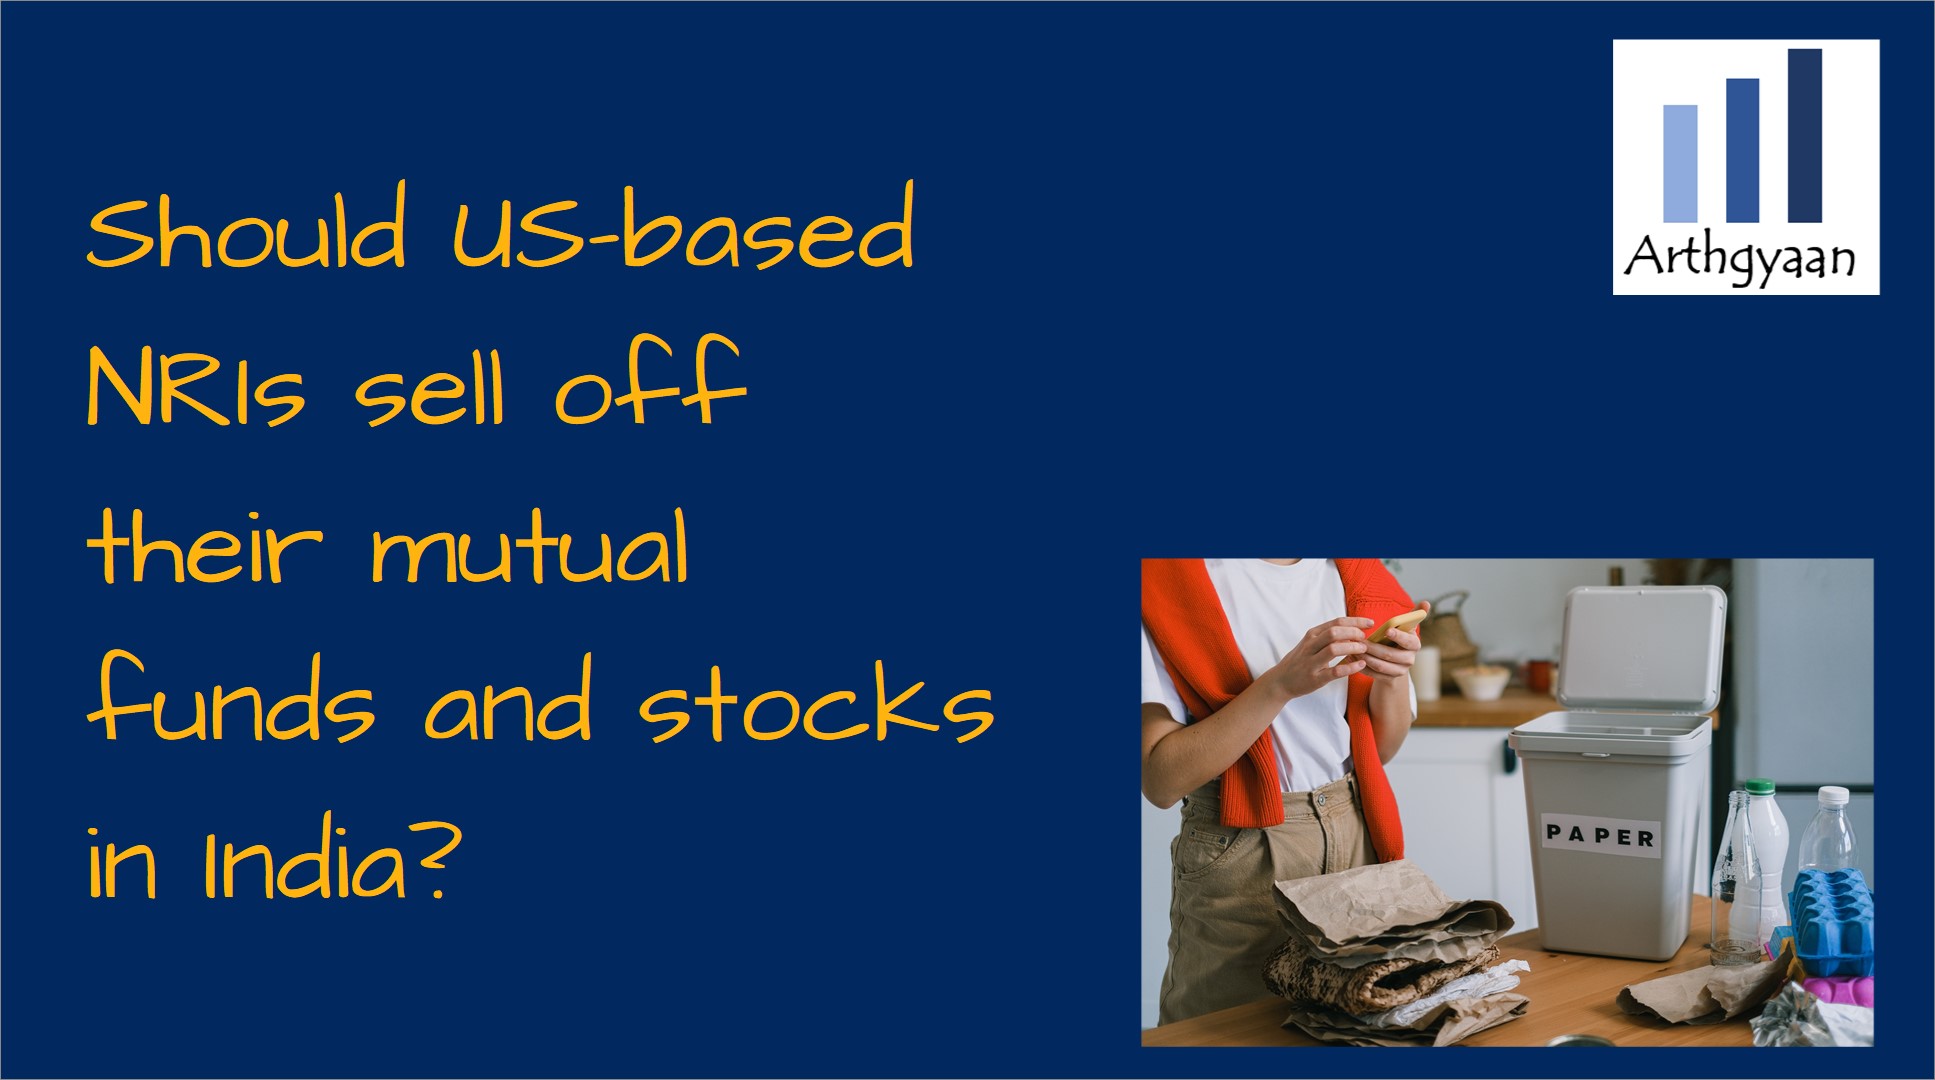 Should US-based NRIs sell off their mutual funds and stocks in India?